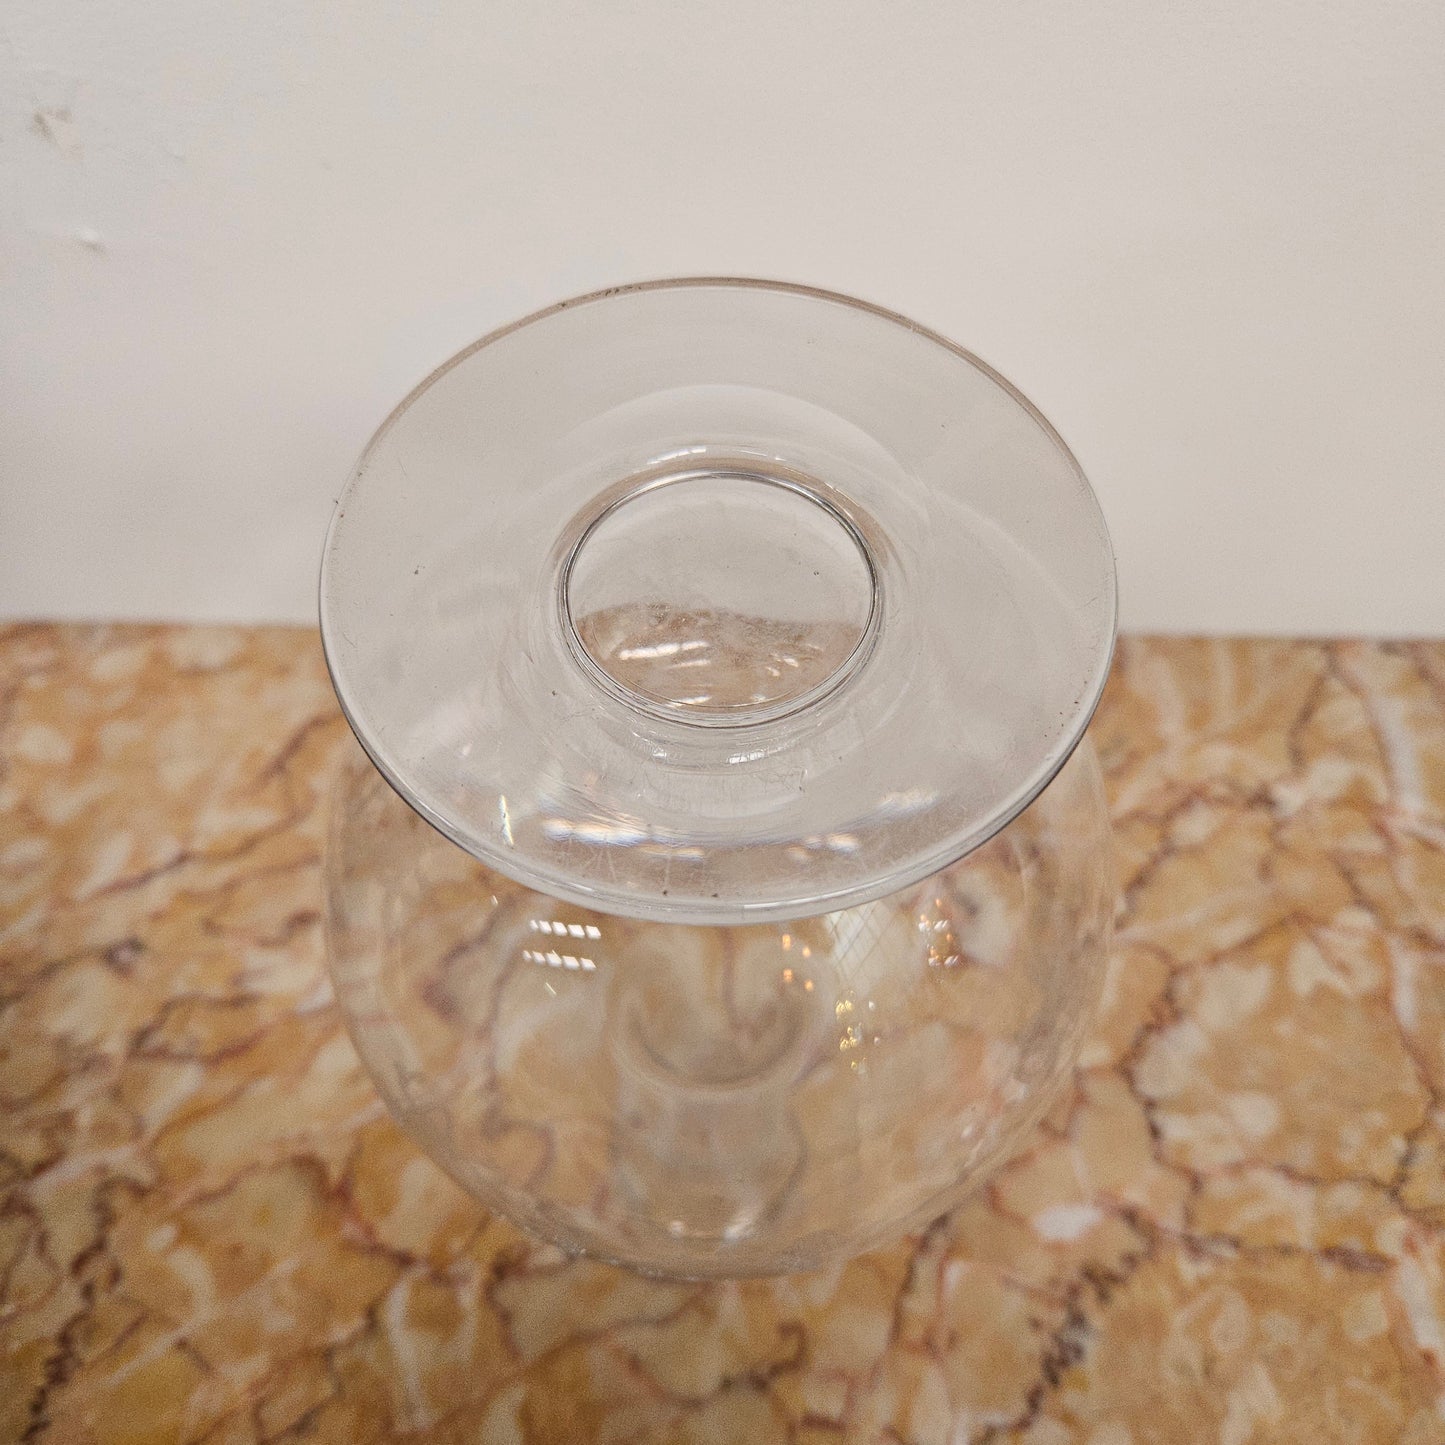 Large Crystal Glass Victorian Decanter